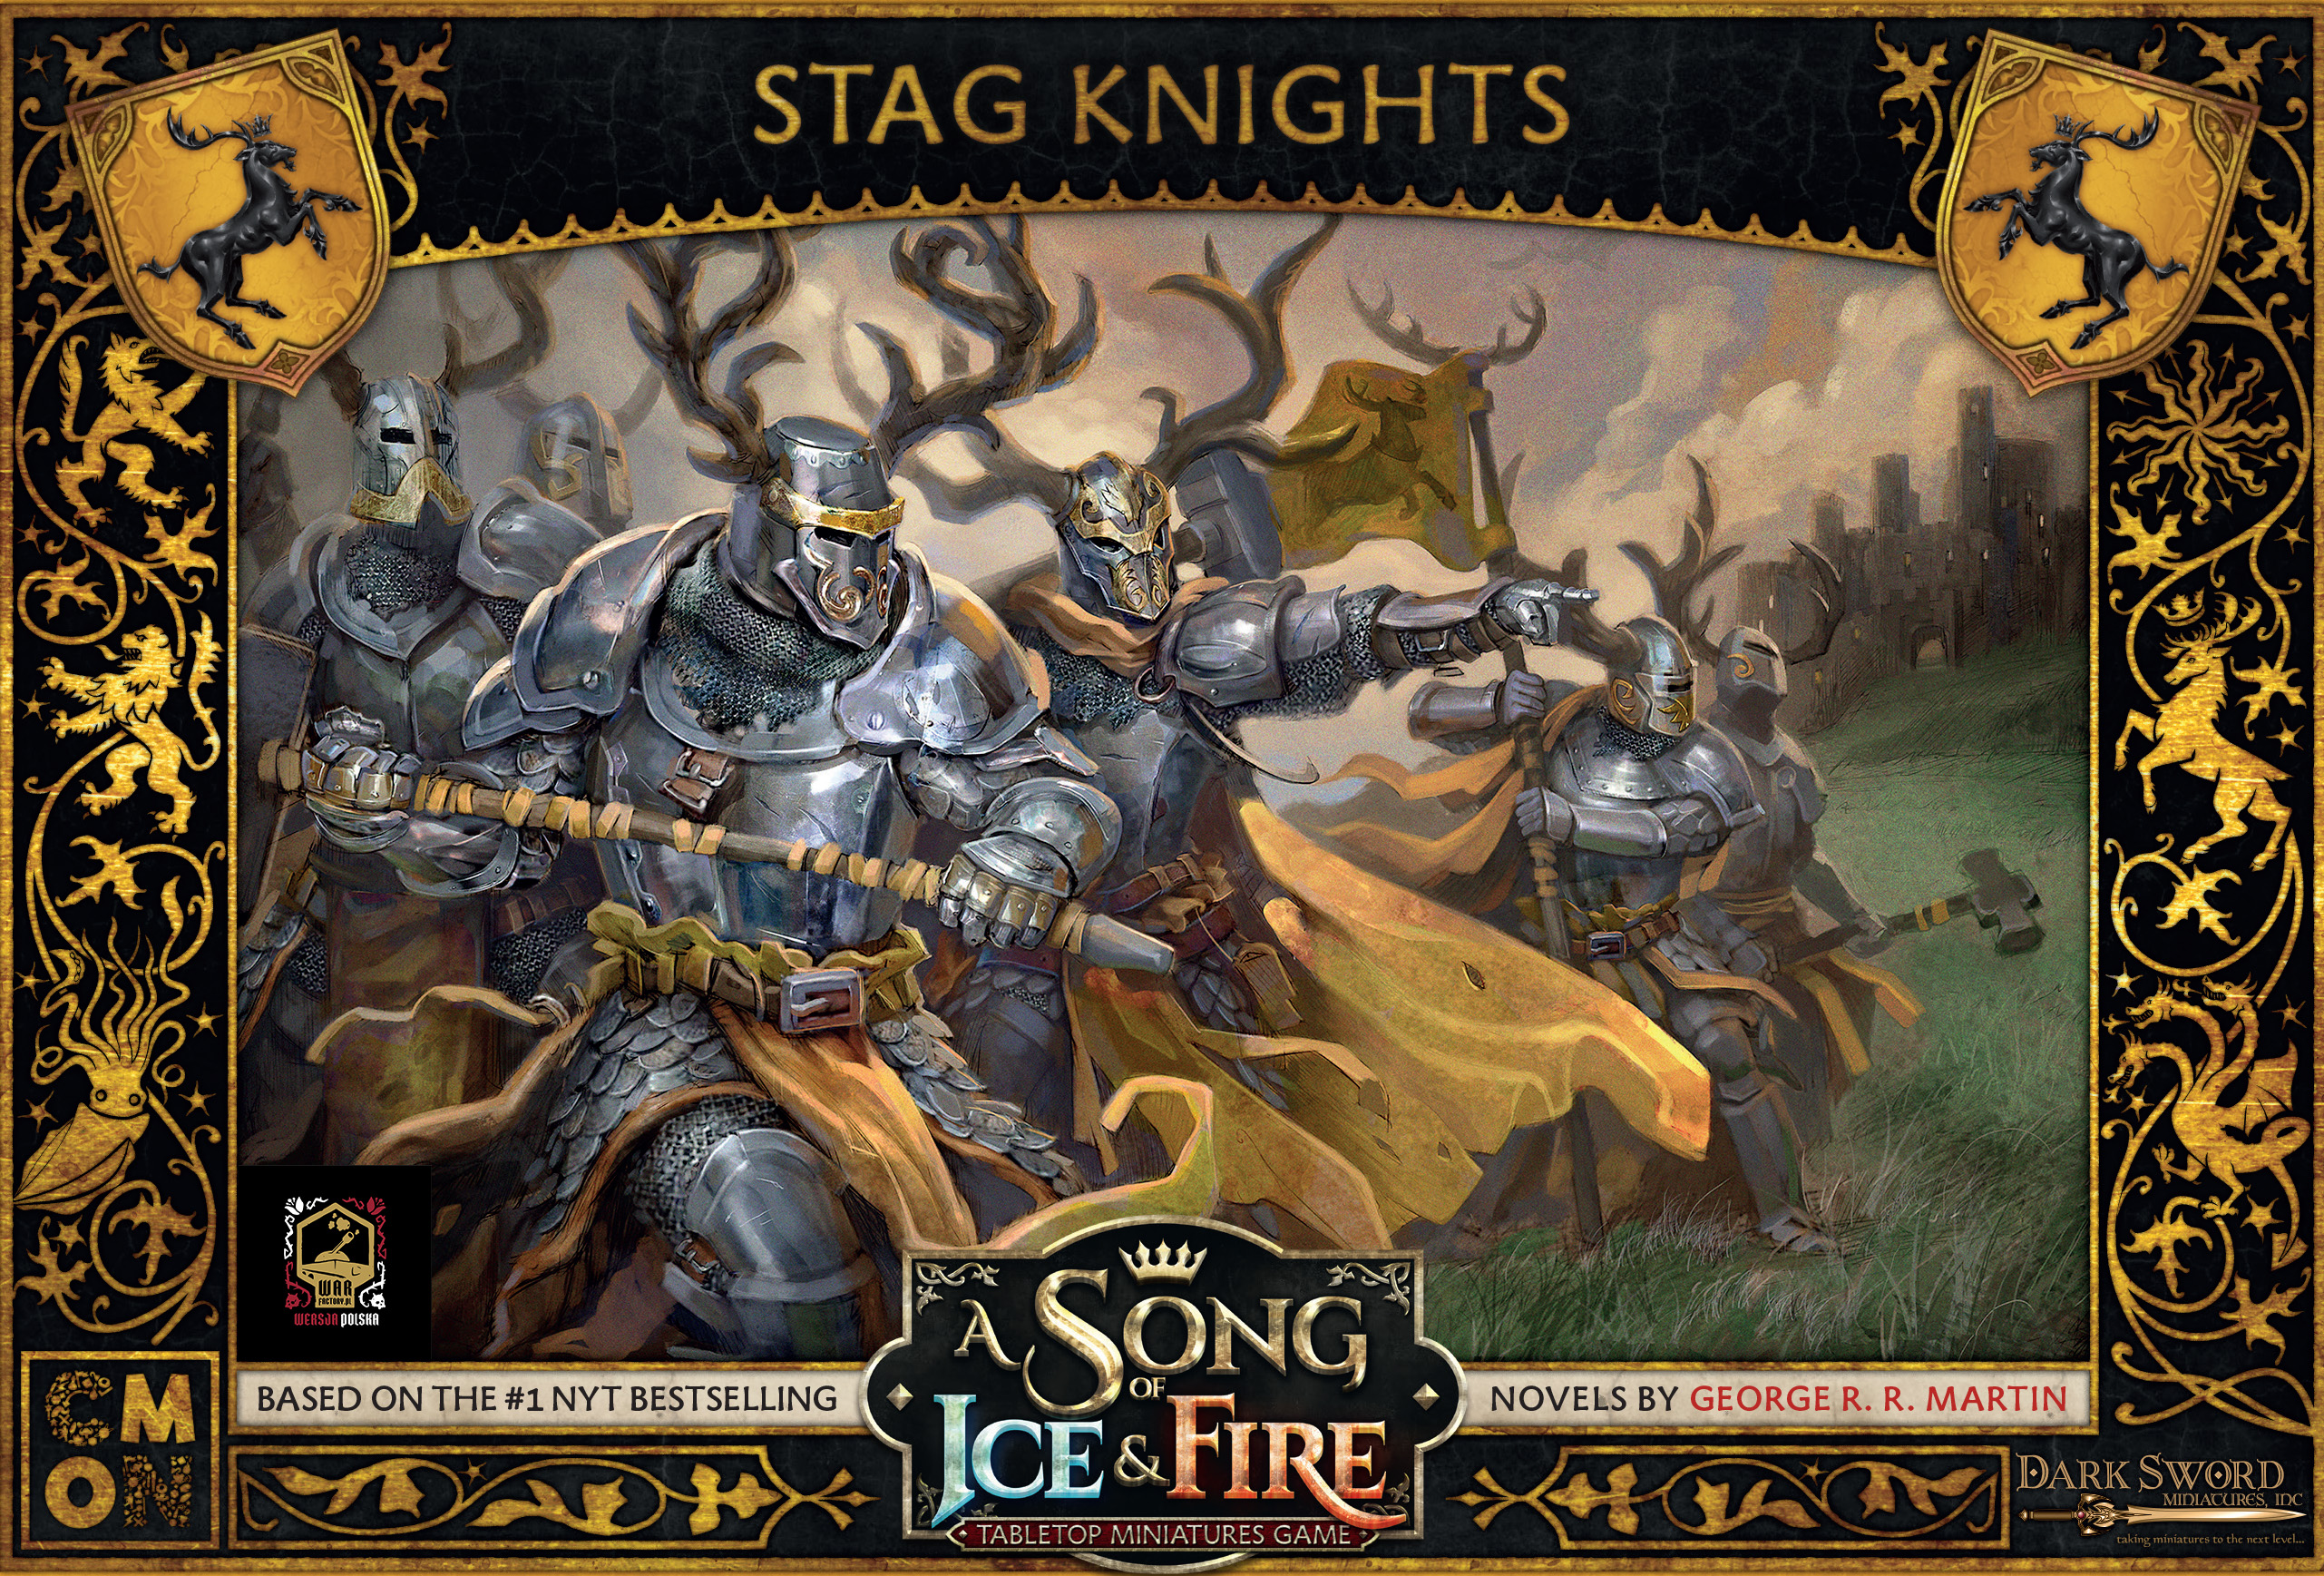 A Song of Ice & Fire: Stag Knights (Rogaci Rycerze)